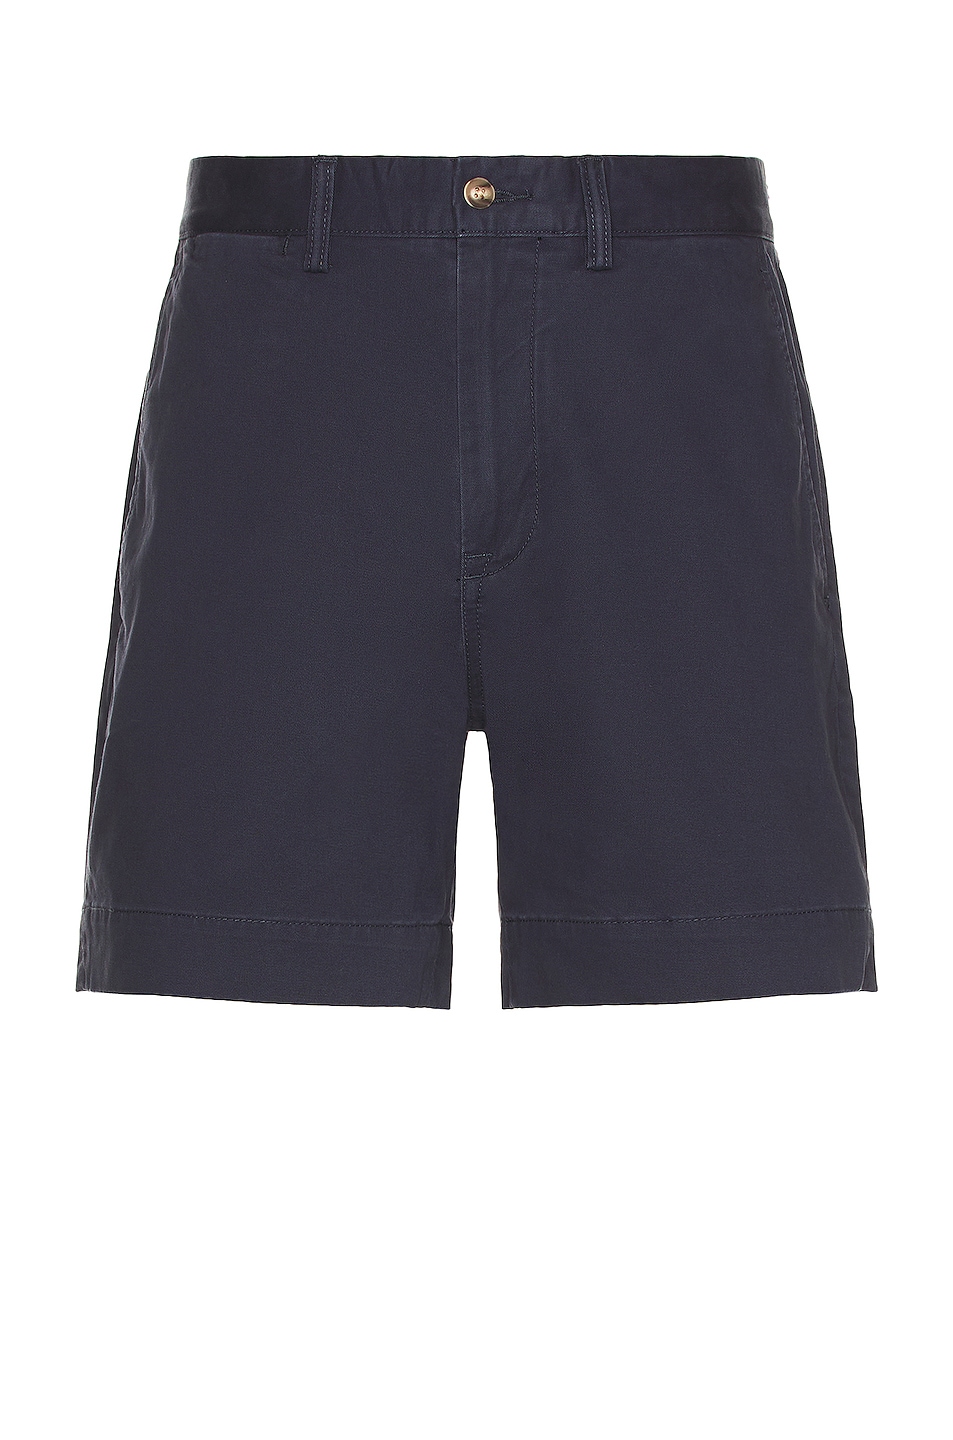 Image 1 of Polo Ralph Lauren Flat Shorts in Nautical Ink